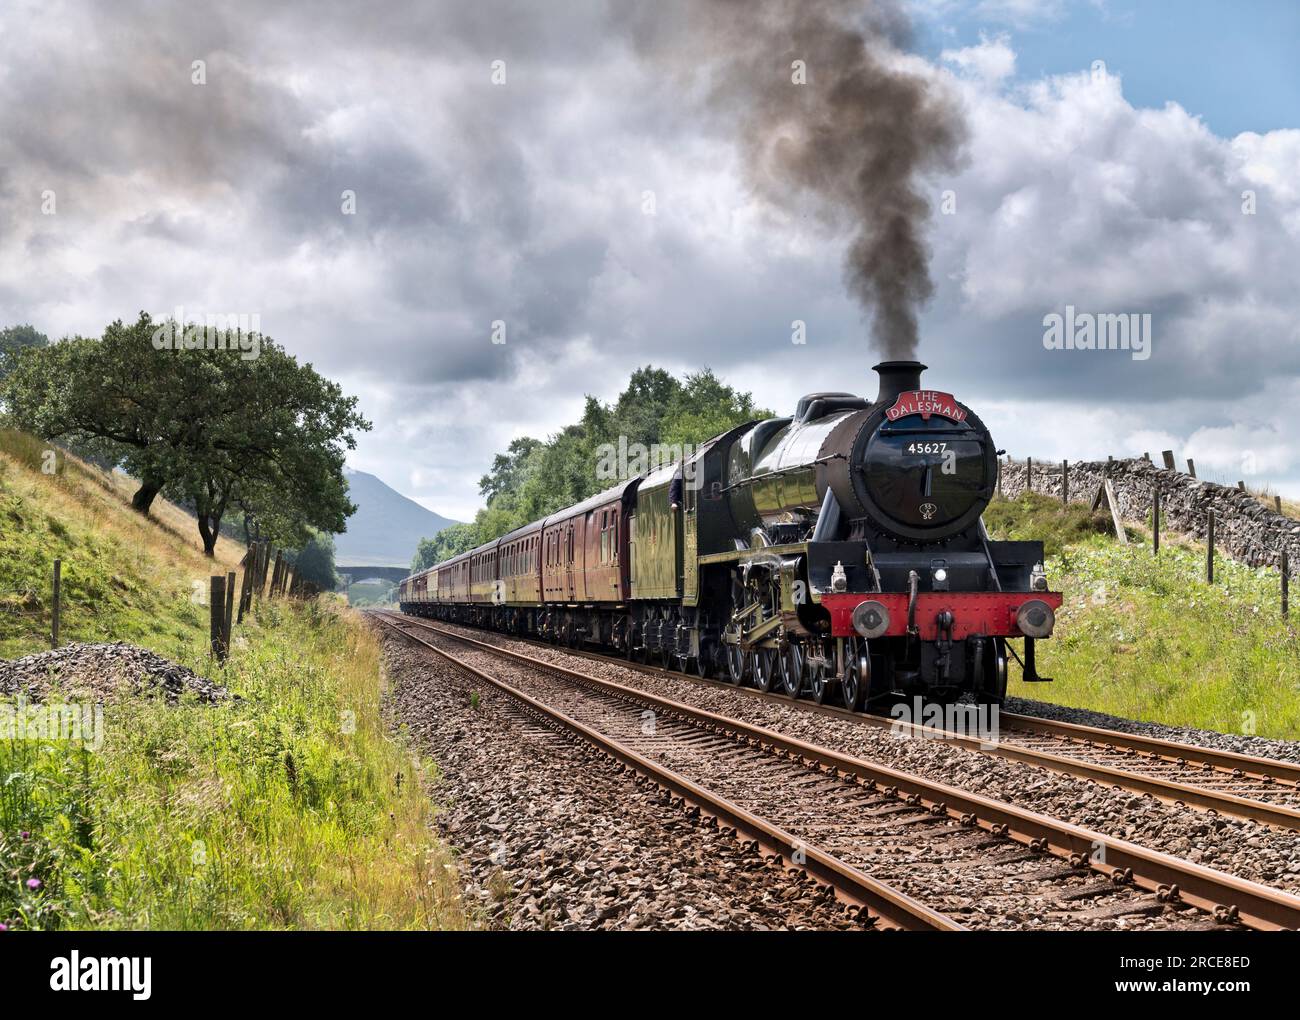 'The Dalesman' steam special seen at Blea Moor on the Settle-Carlisle railway, en route to Carlisle. Ingleborough peak is seen in the background. Stock Photo